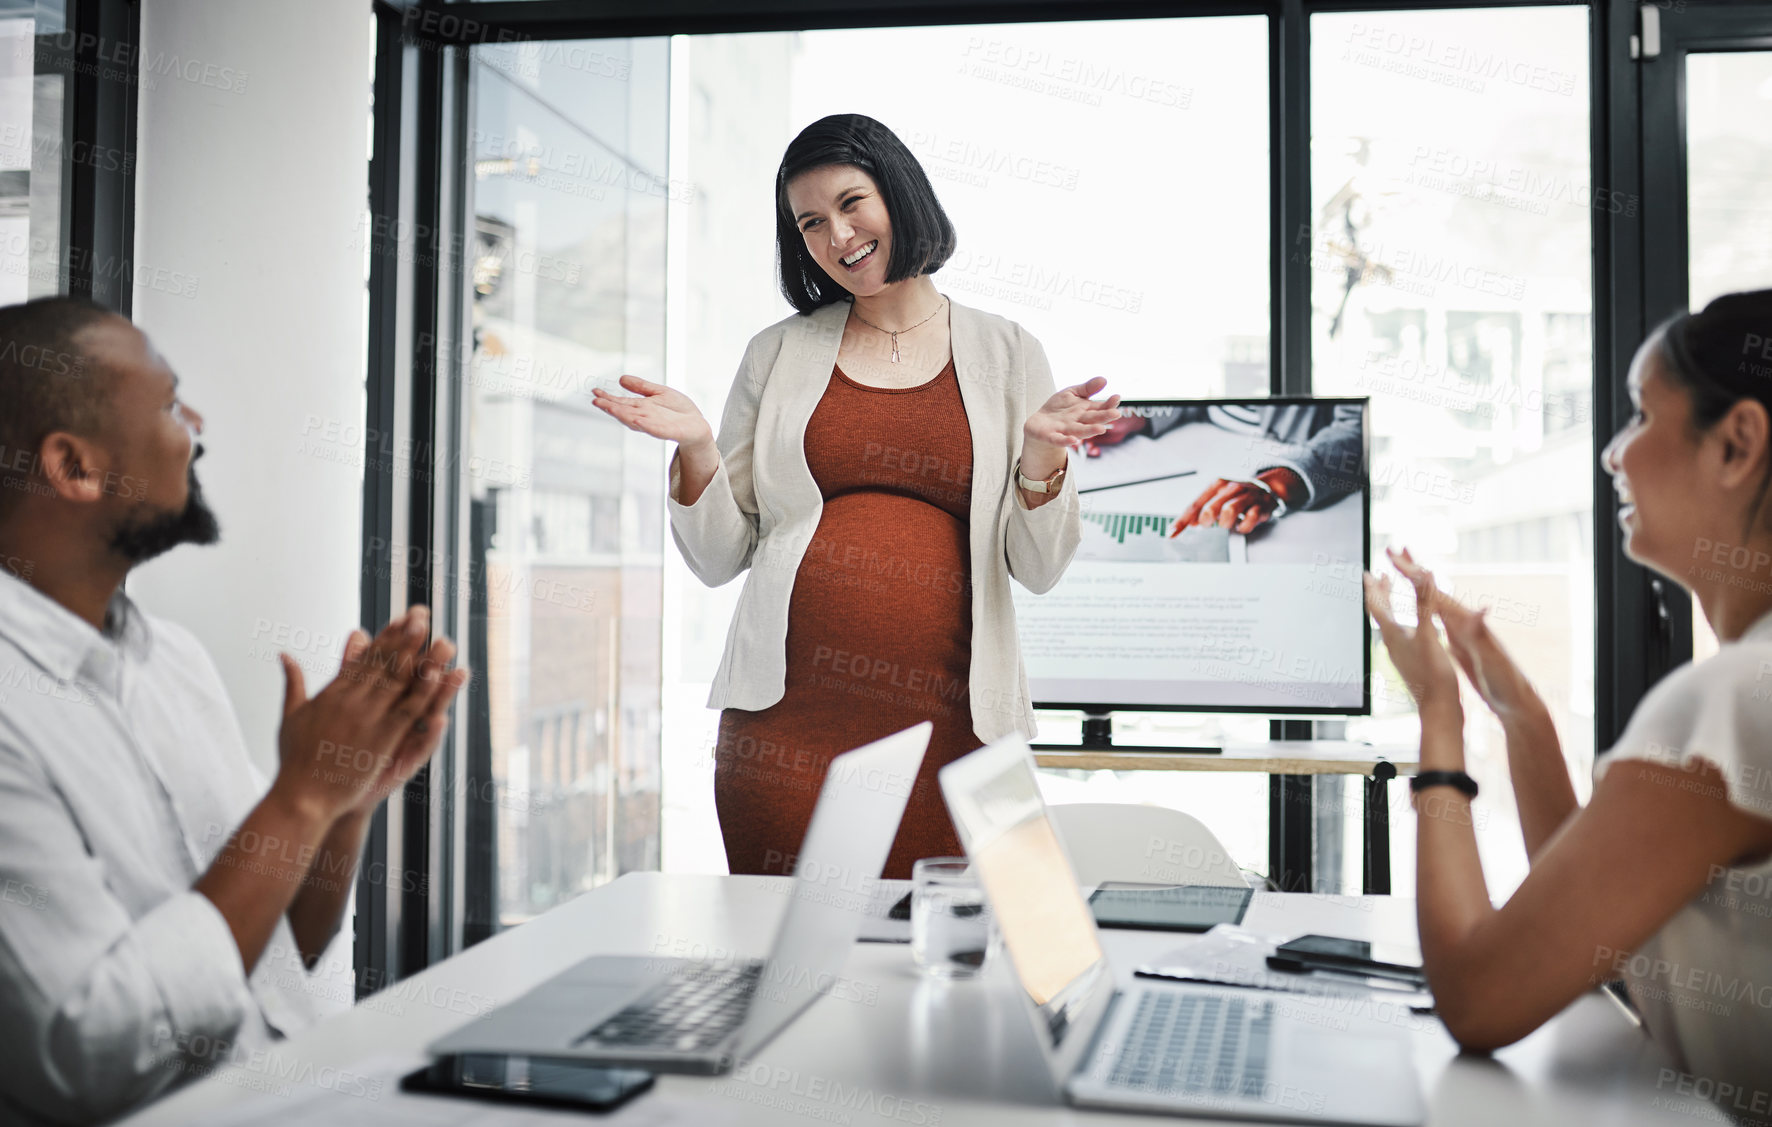 Buy stock photo Shot of a group of businesspeople clapping during a meeting with their pregnant colleague in a modern office